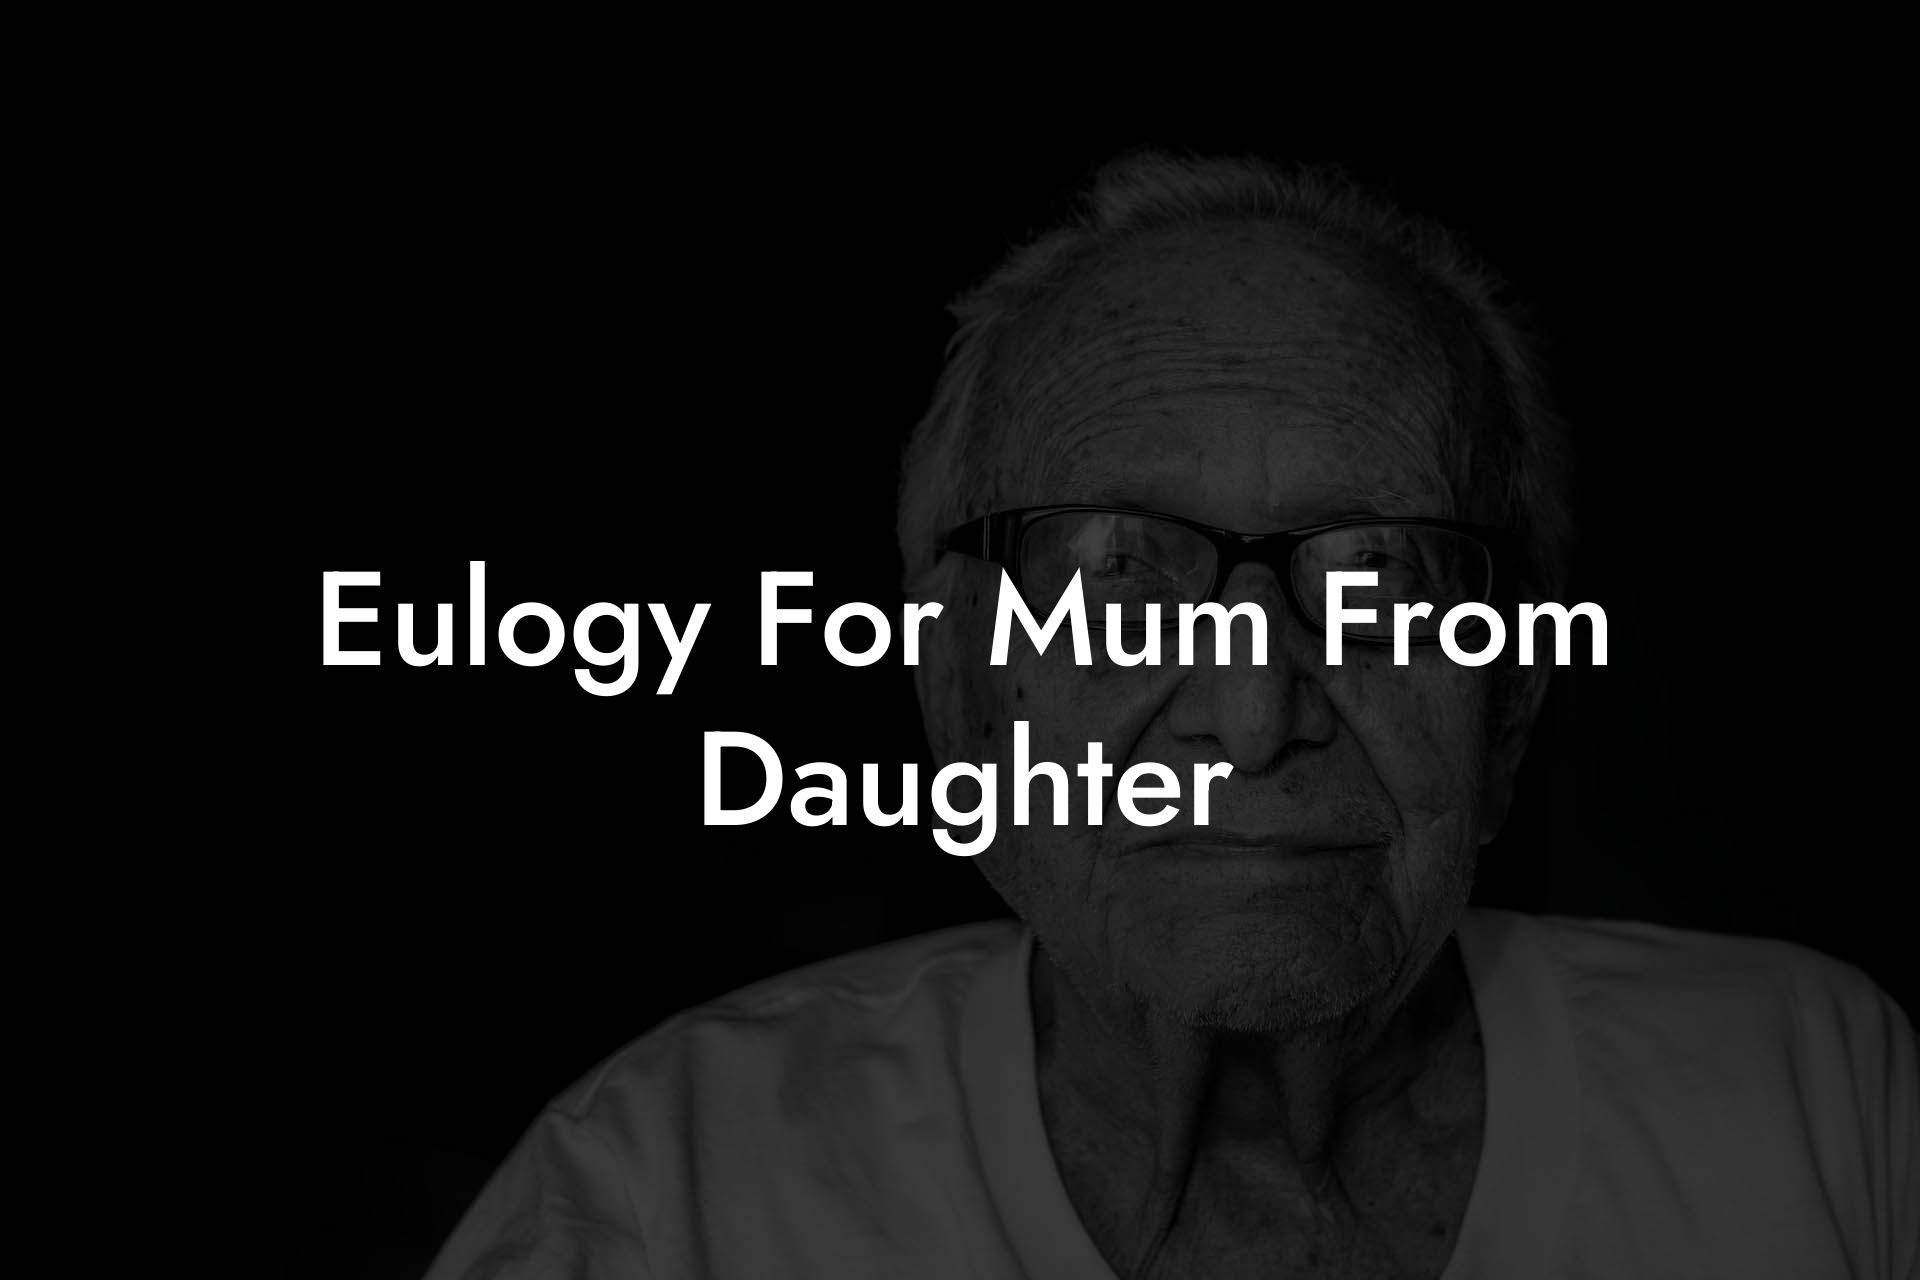 Eulogy For Mum From Daughter